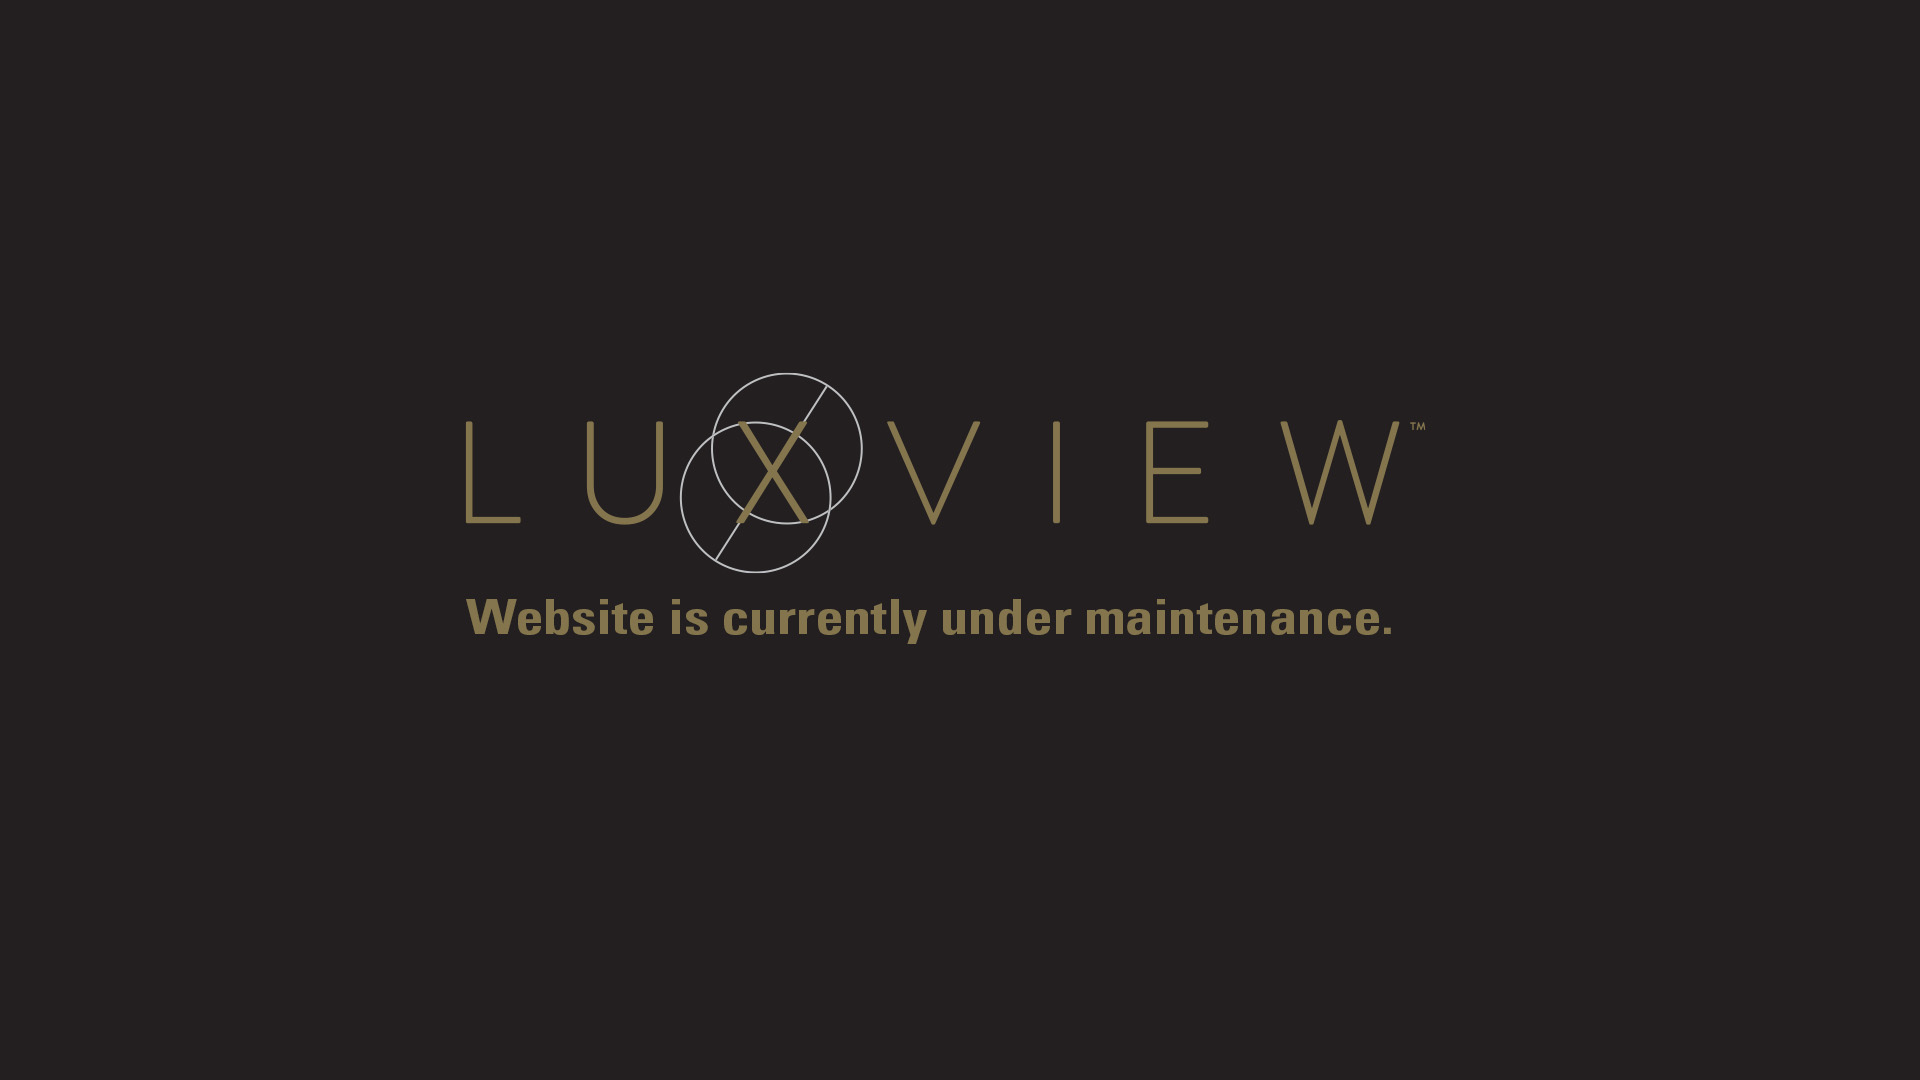 Luxview